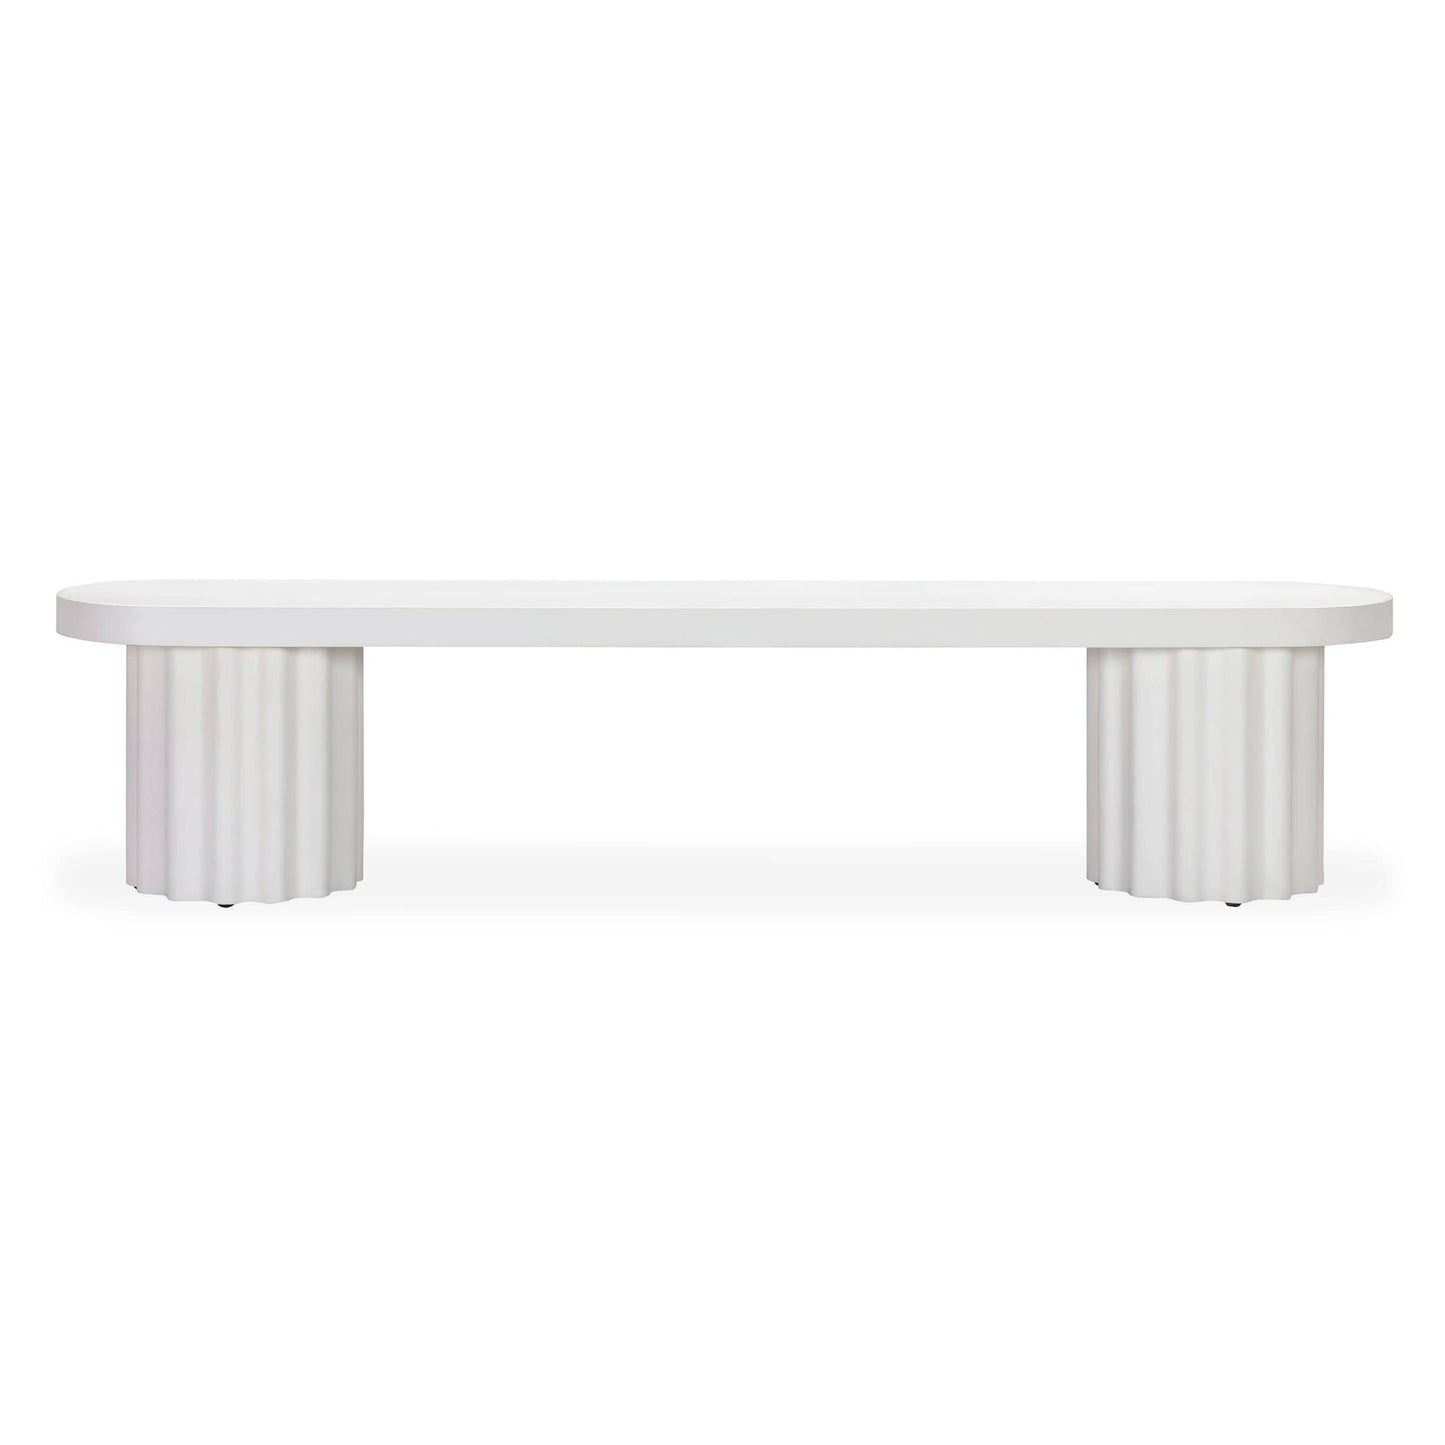 Flock Outdoor Dining Bench 210cm - White Concrete